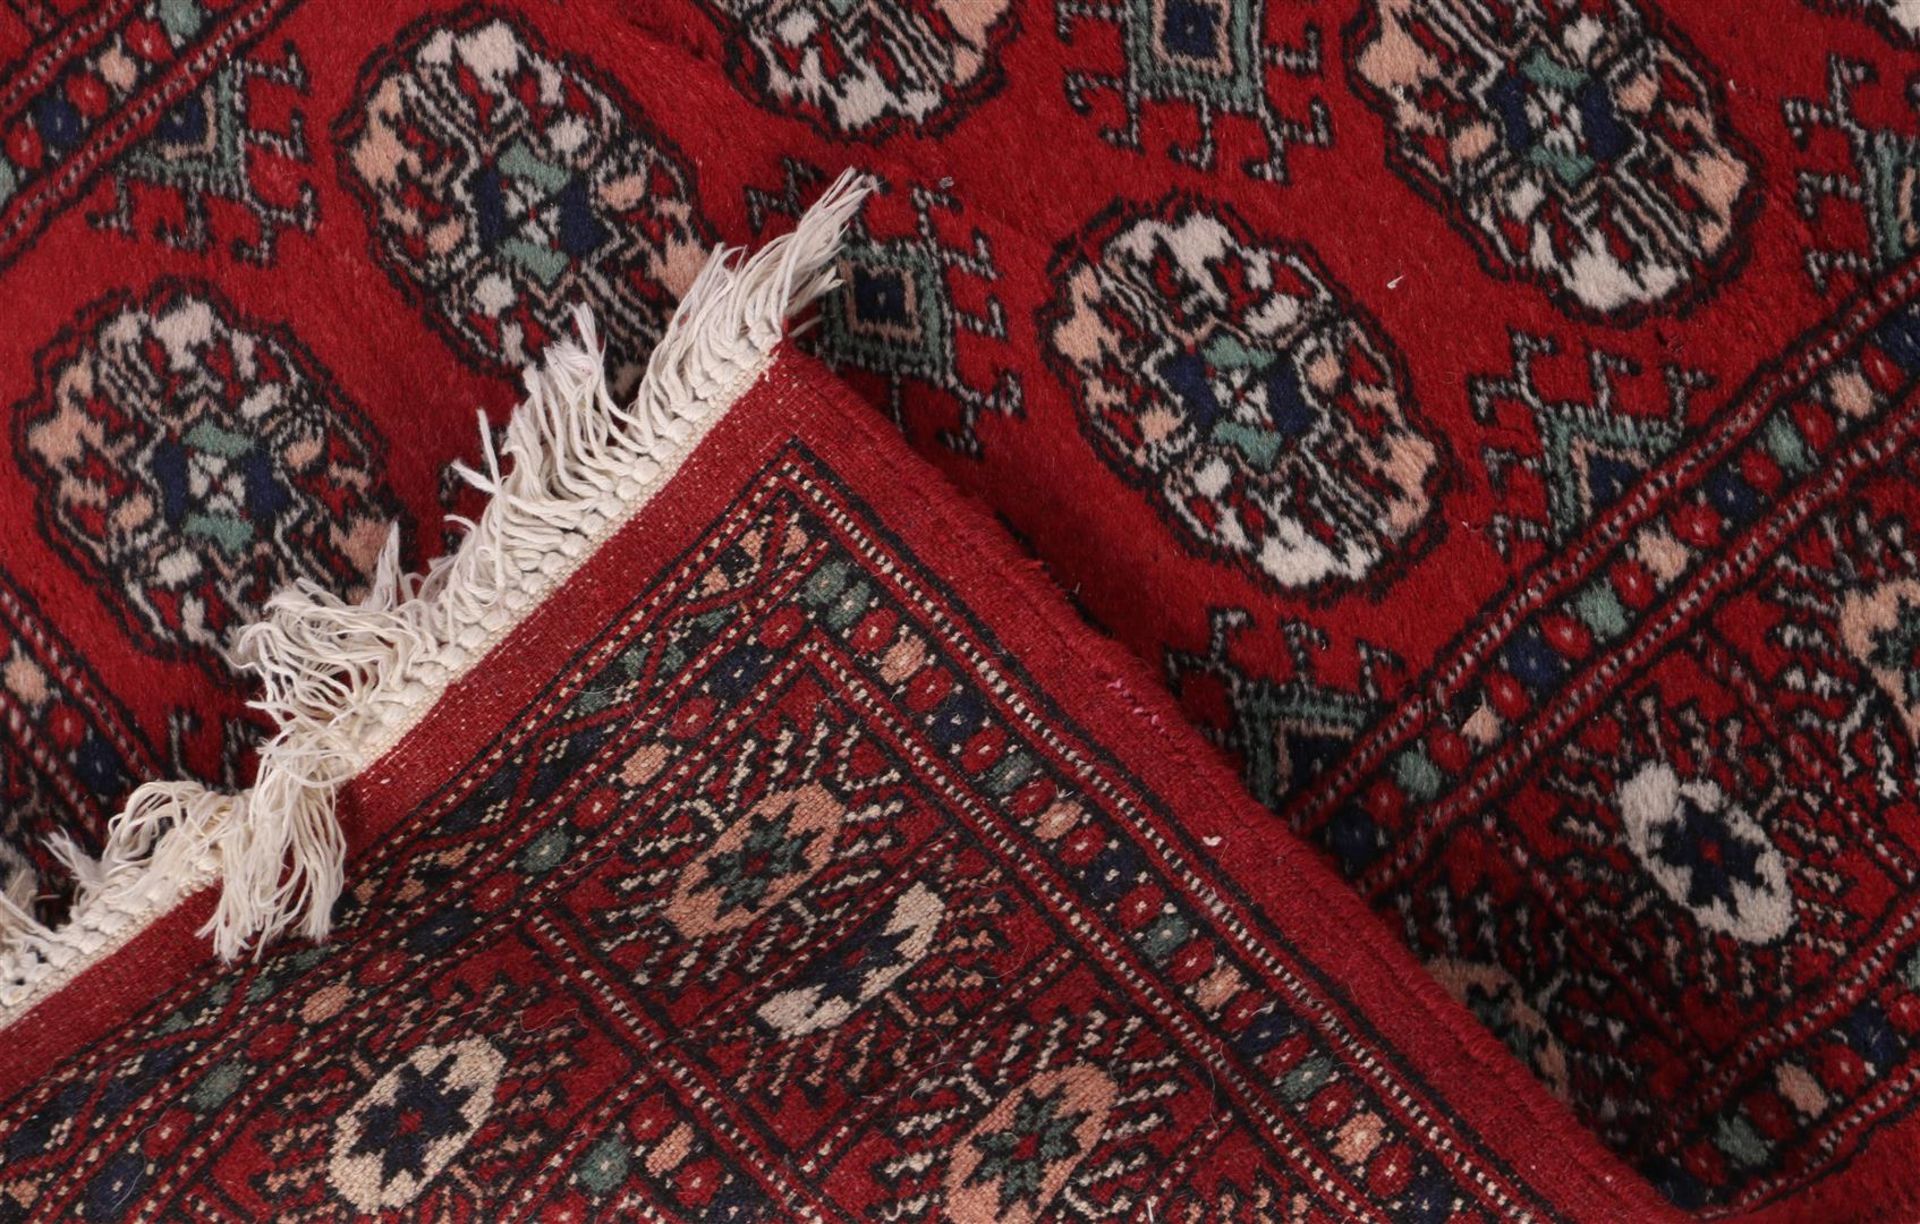 Hand-knotted oriental carpet, Lahore Pakistan - Image 4 of 4